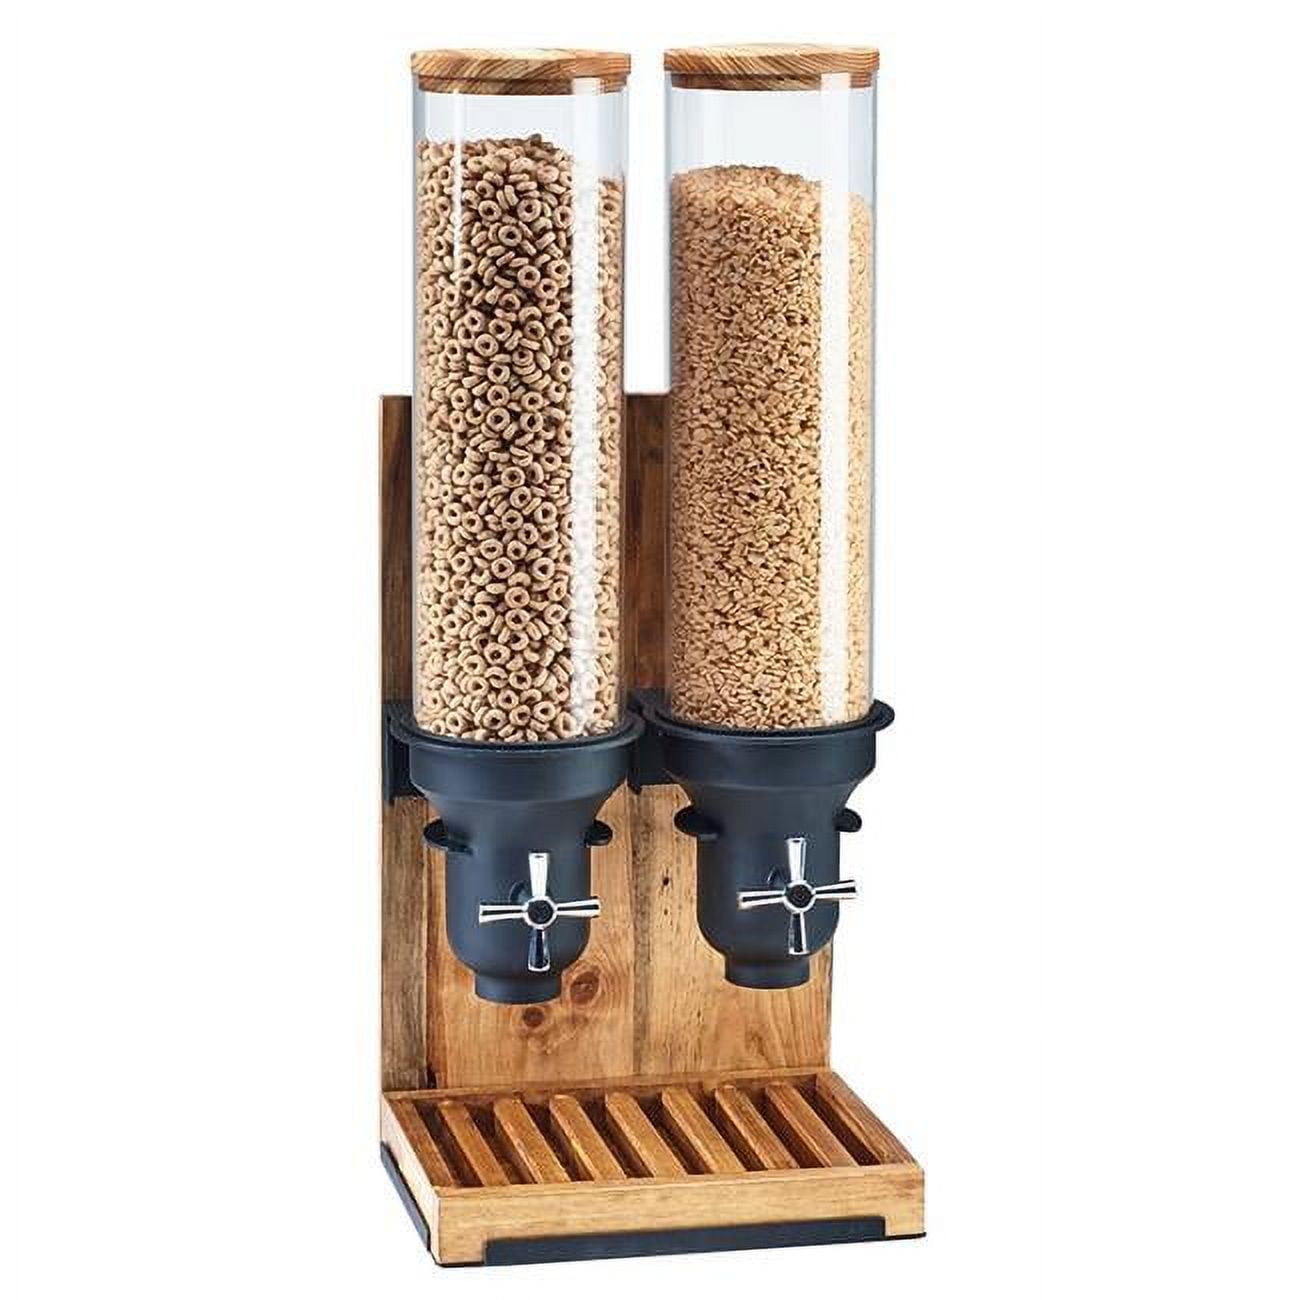 3584-2-99 4.5 Ltr Madera Cereal Dispenser With 2 Cylinders - 11 X 8.75 X 26.5 In.